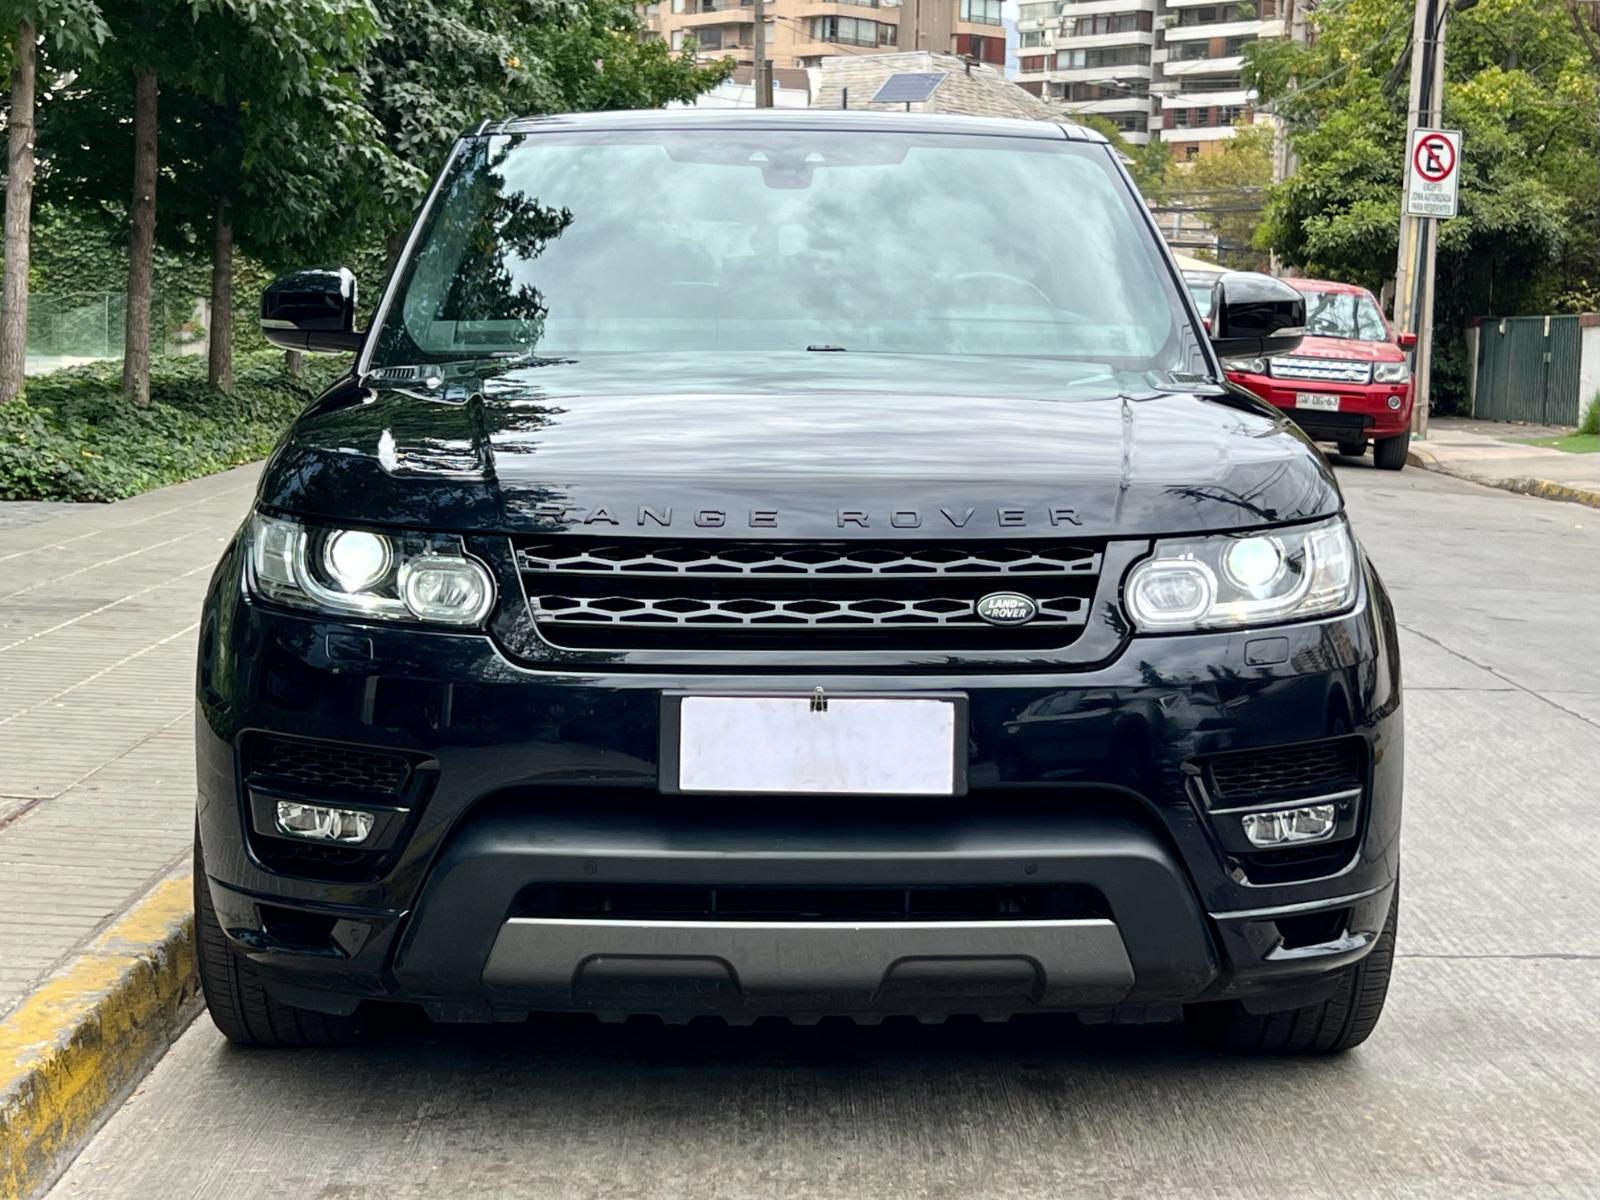 LAND ROVER RANGE ROVER SPORT 5.0 2017 SUPERCHARGED AUTOBIOGRAPHY - FULL MOTOR